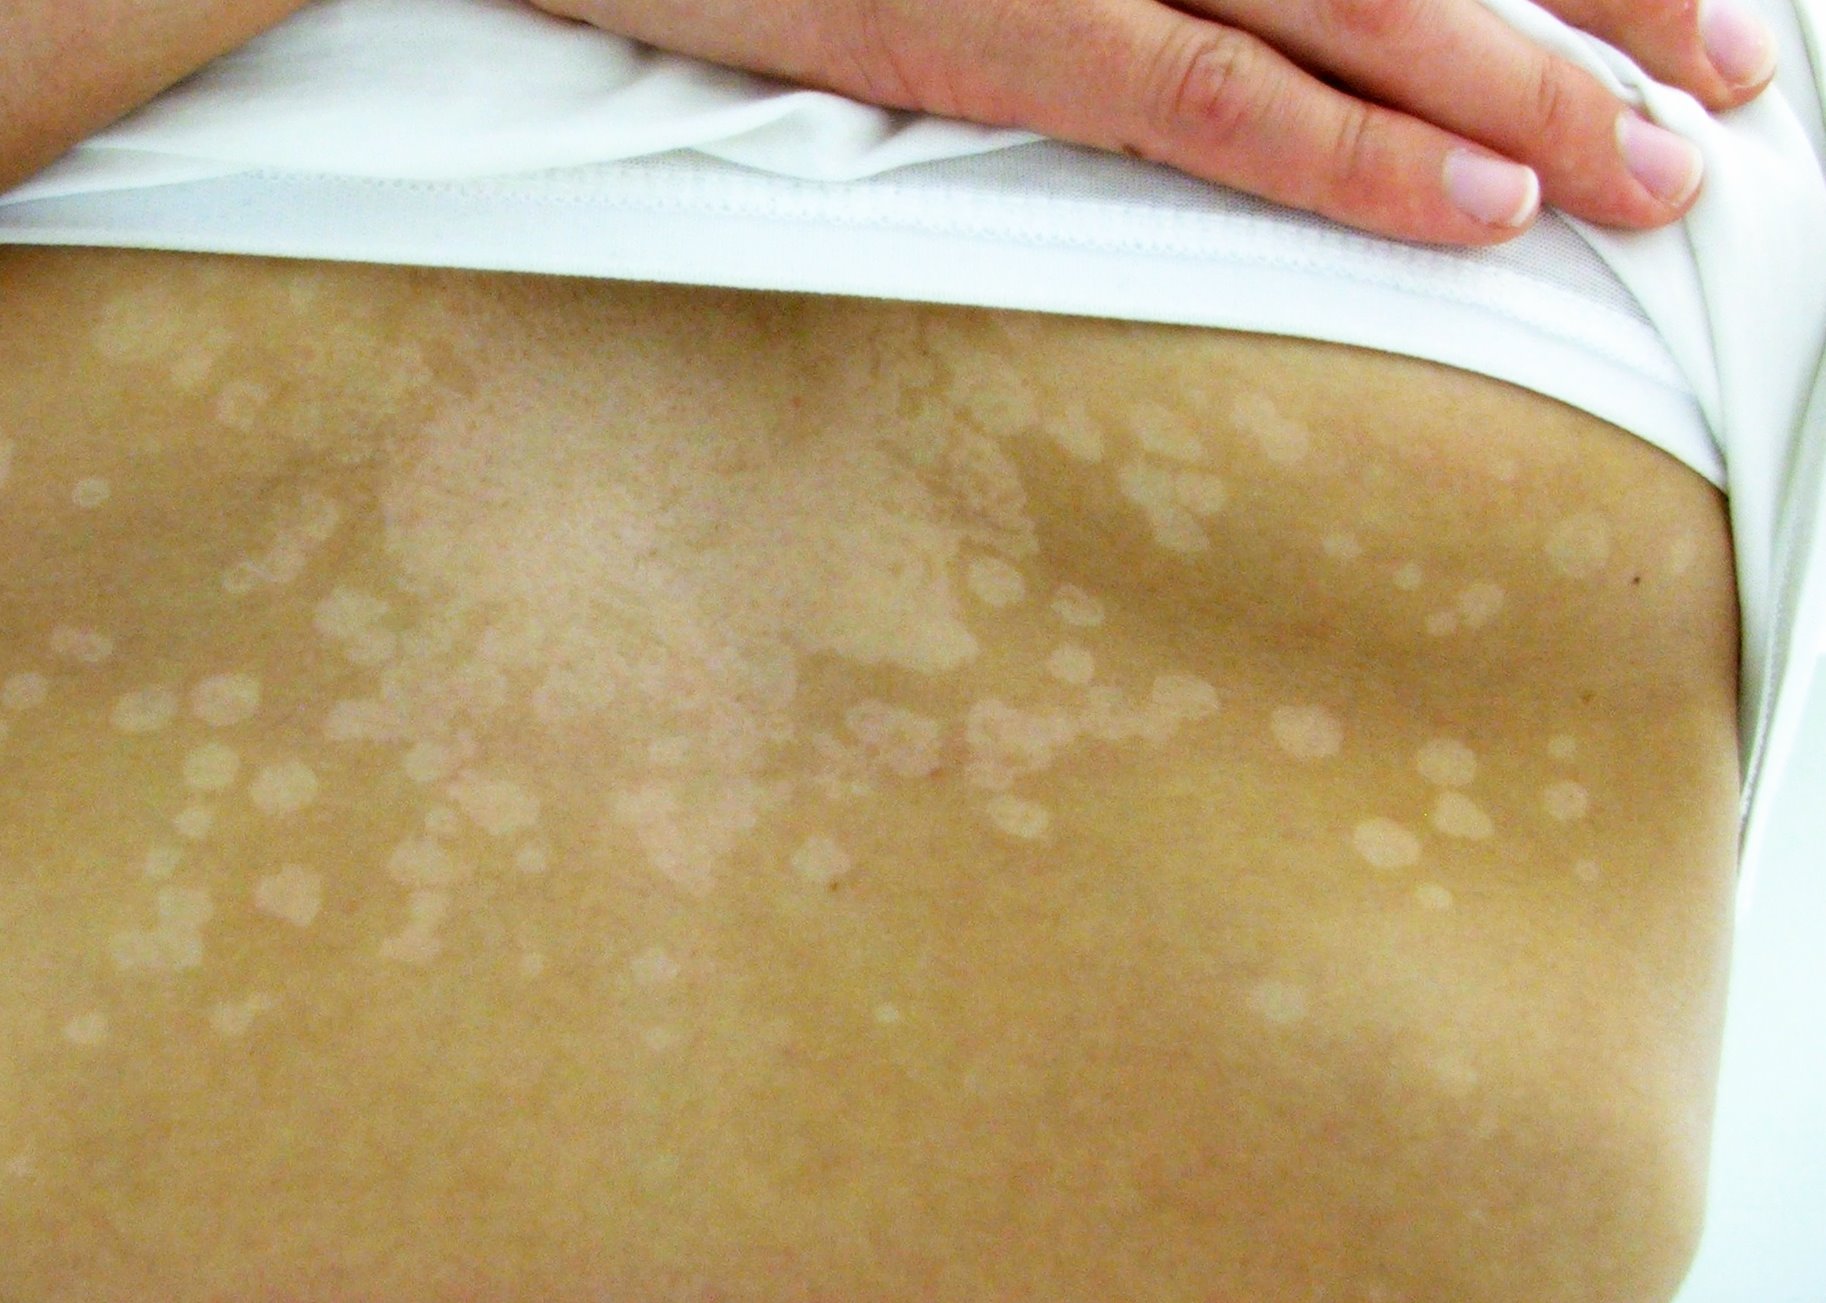 Tinea Versicolor or Pityriasis Versicolor-Causes-Diagnosis-Best Treatment-Best Homeopathic doctor in Pakistan-Dr Qaisar Ahmed-Al Haytham clinic-Risalpur